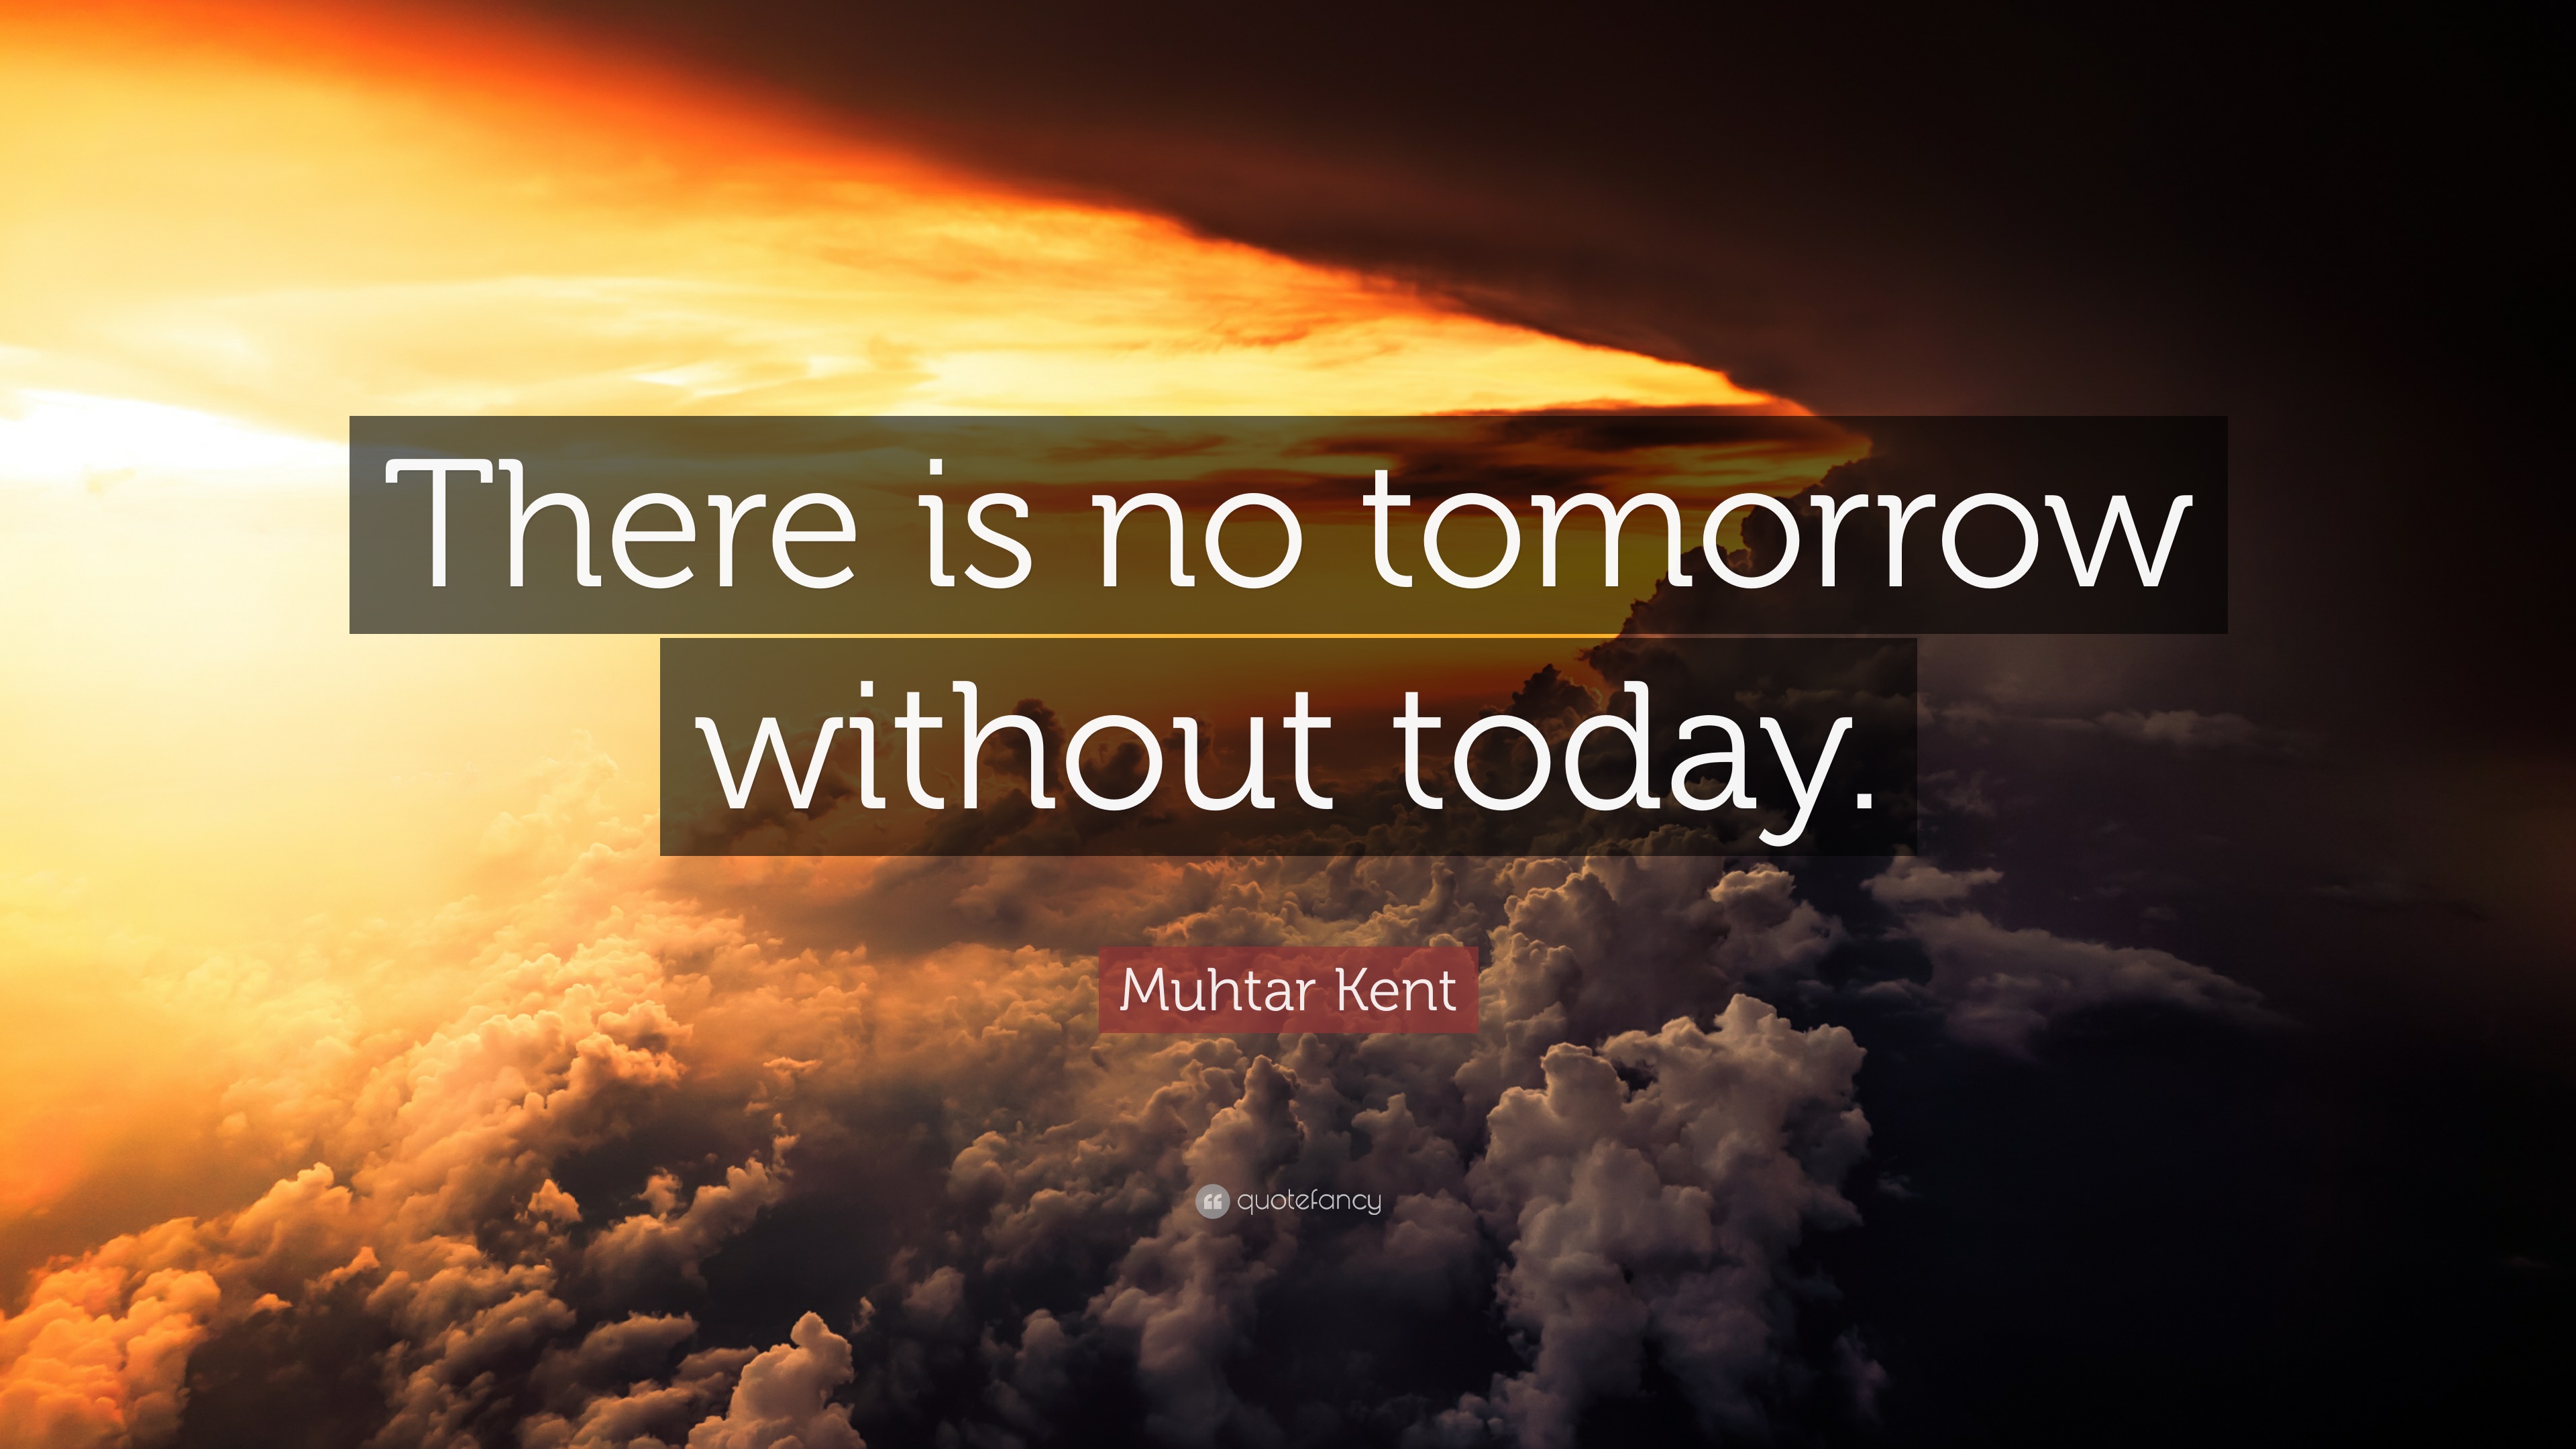 Muhtar Kent Quote: “There is no tomorrow without today.”